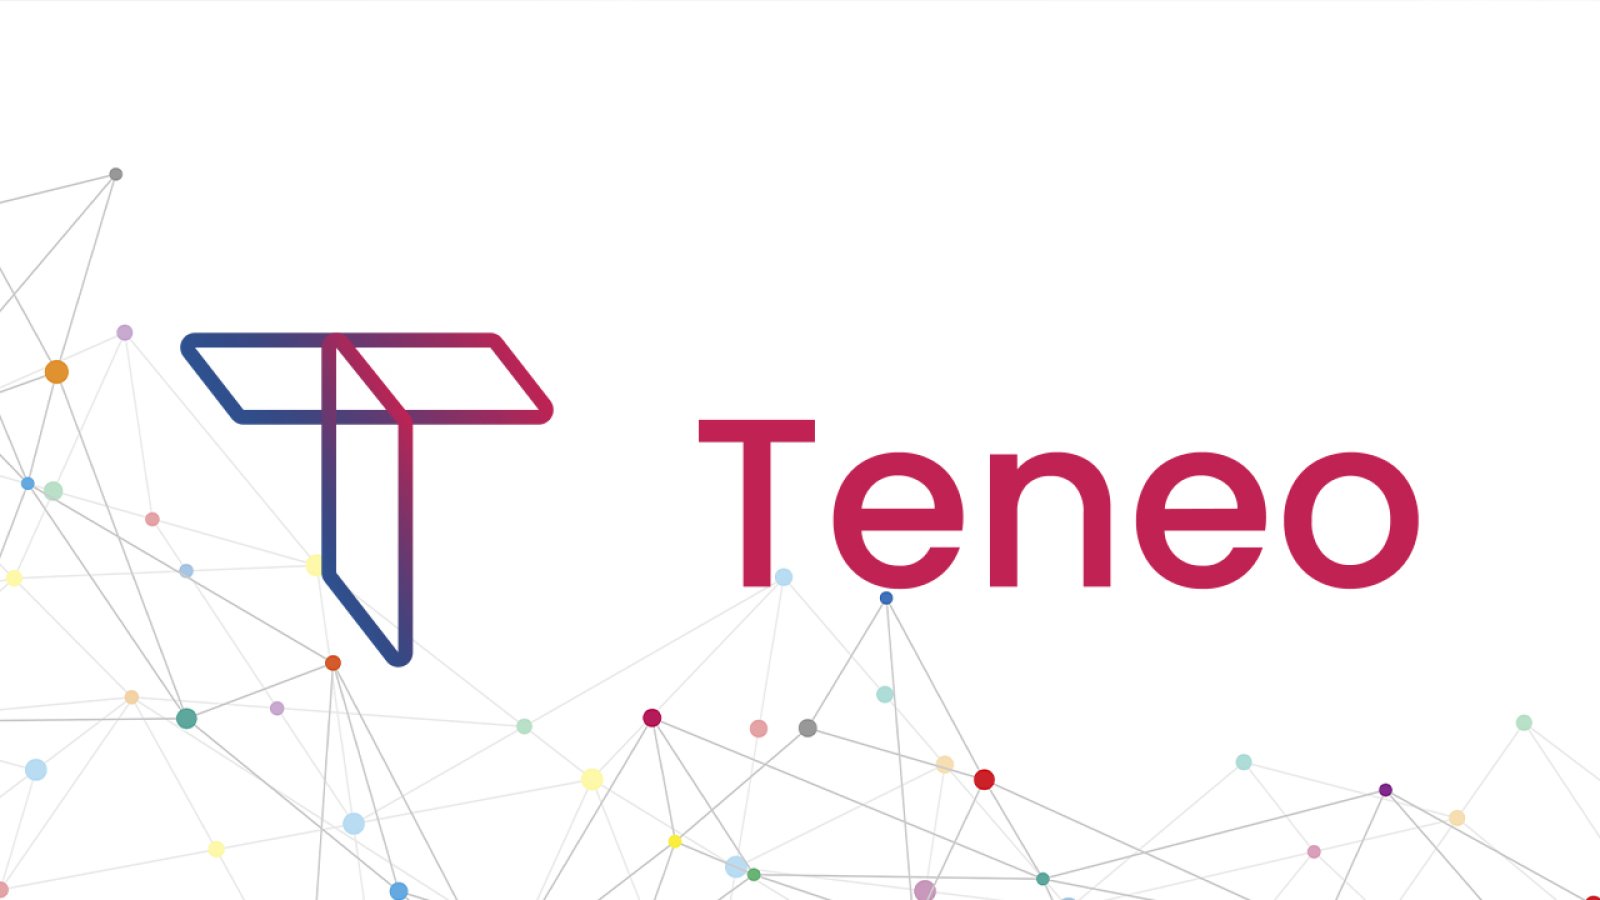 Introducing Teneo, a Сrypto Project That Enables HODlers to Profit from the Cryptocurrency Volatile Market